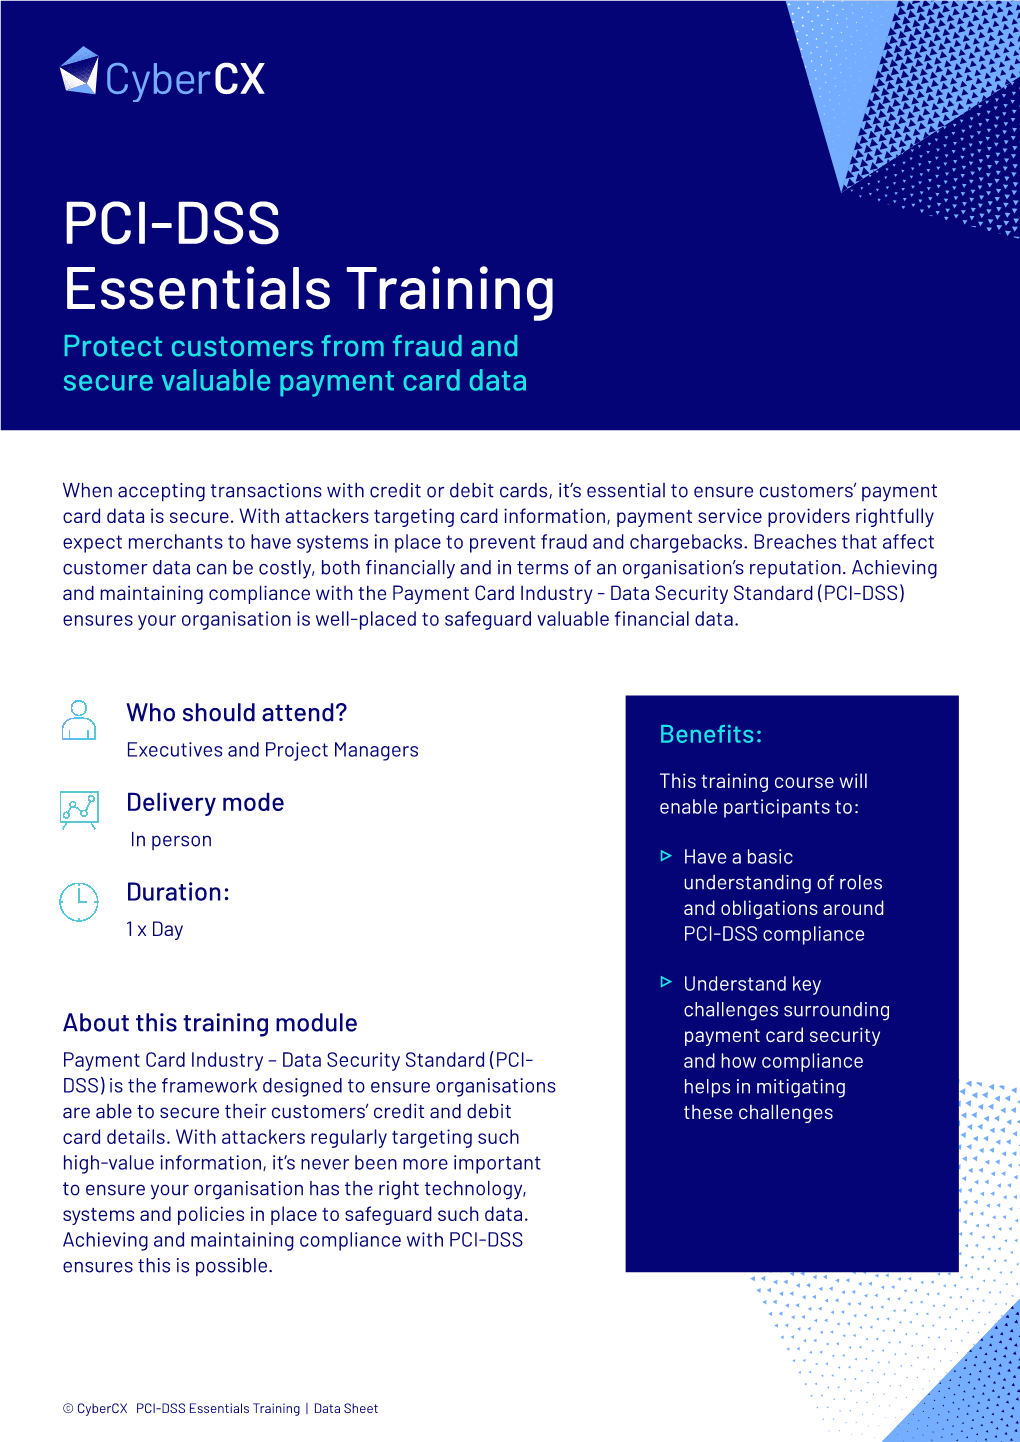 PCI-DSS Essentials Training Protect Customers from Fraud and Secure Valuable Payment Card Data